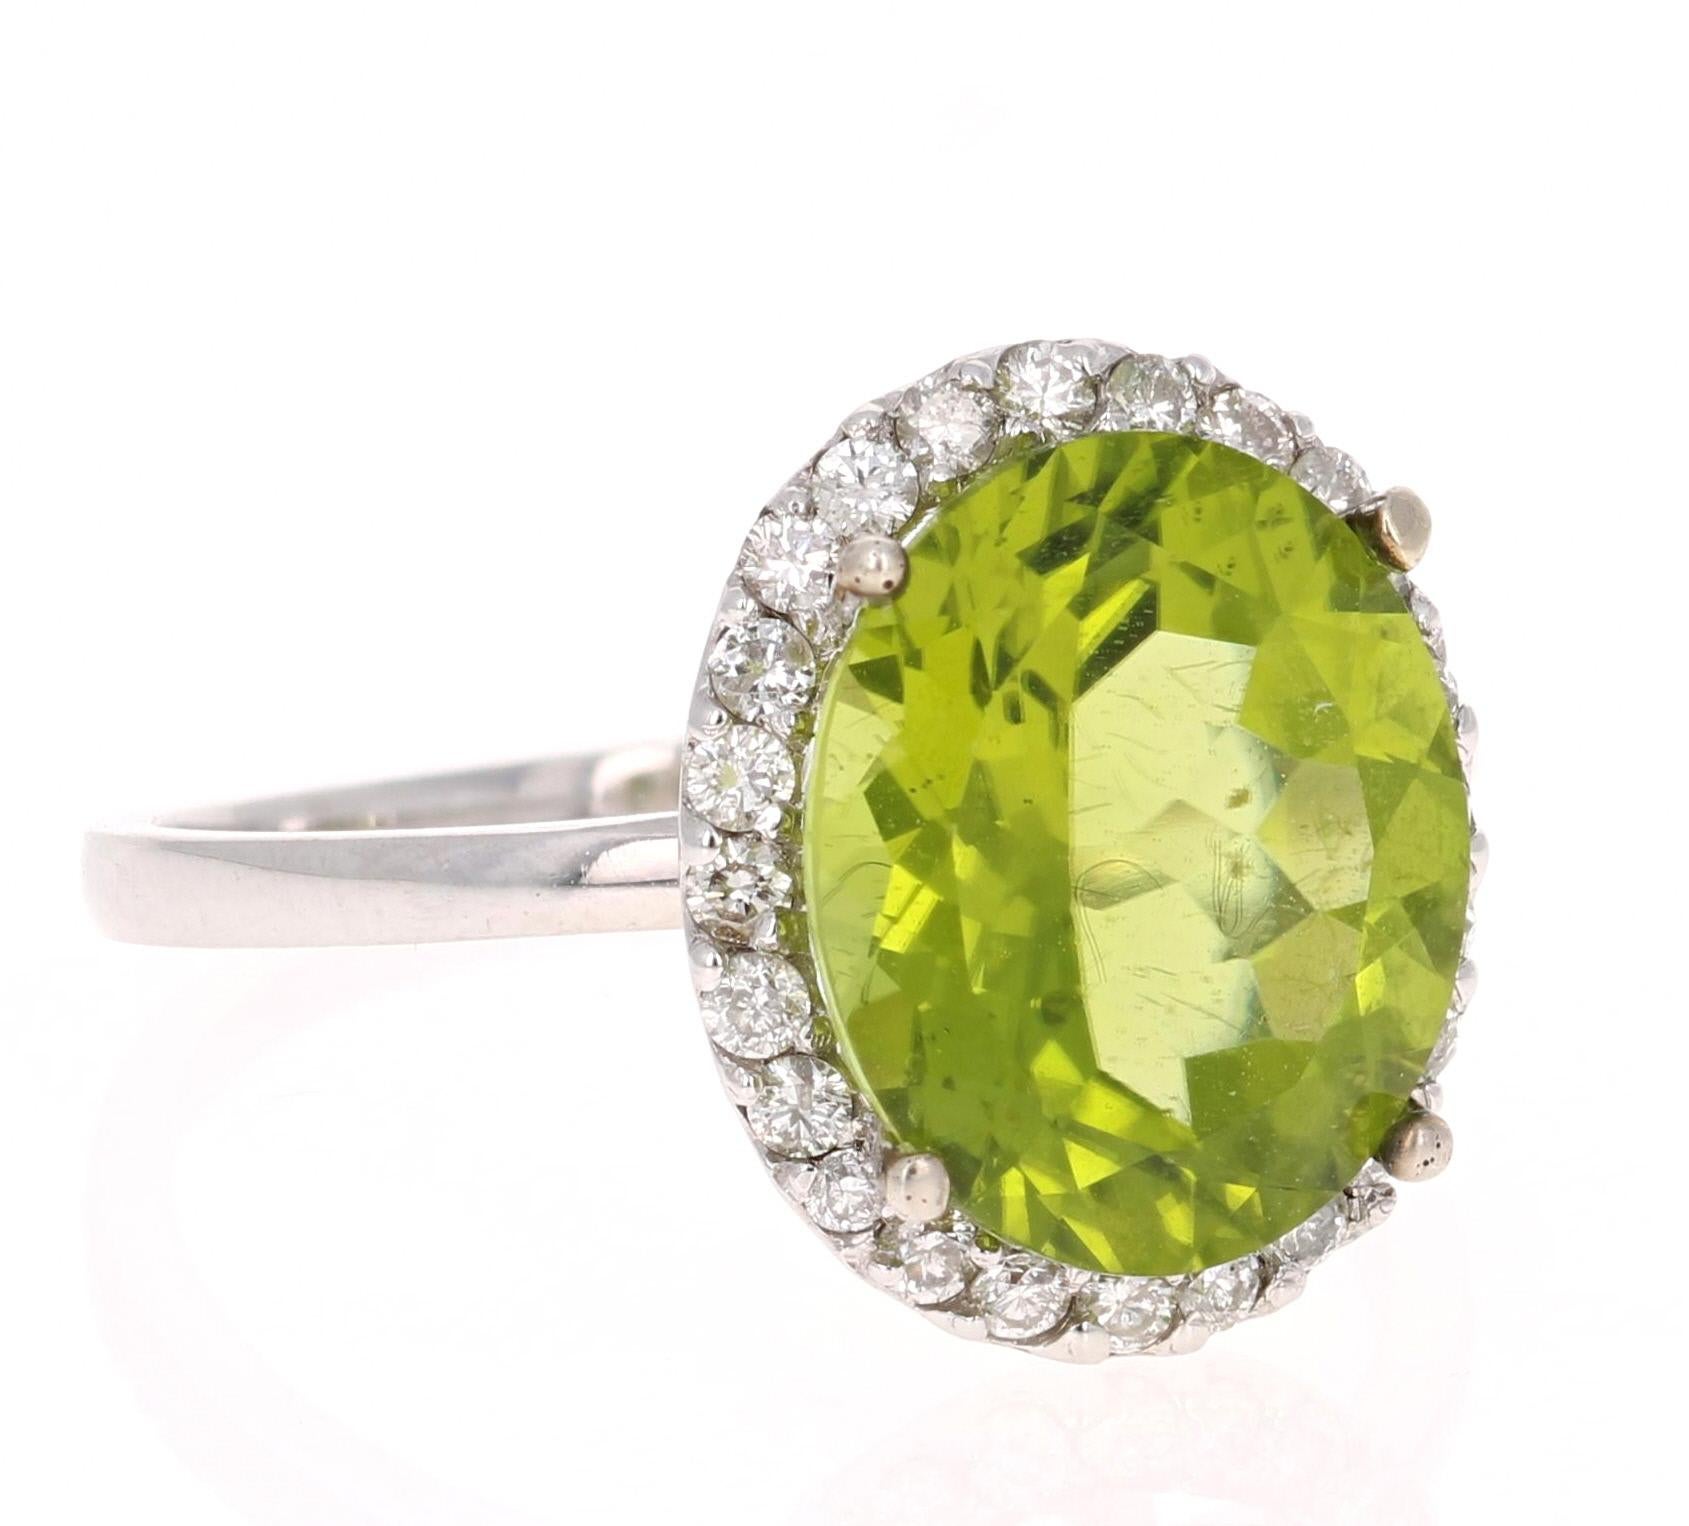 This beautiful ring has a Oval Cut Peridot in the center that weighs 4.66 carats. The ring is surrounded by a Halo of 24 Round Cut Diamonds that weigh 0.35 carats. The total carat weight of the ring is 5.01 carats. 
The setting is crafted in 14K